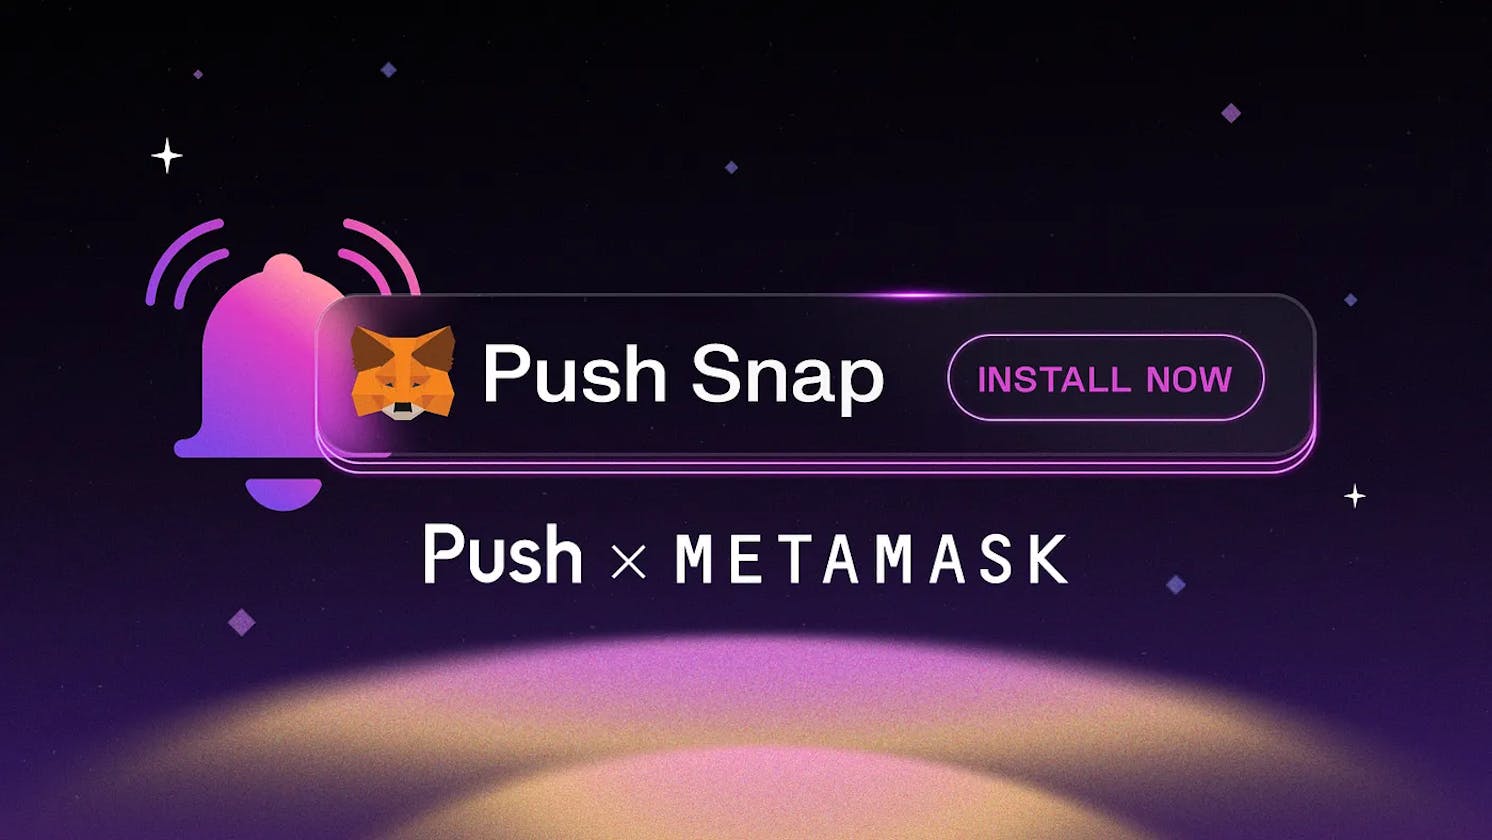 Push Snap Features